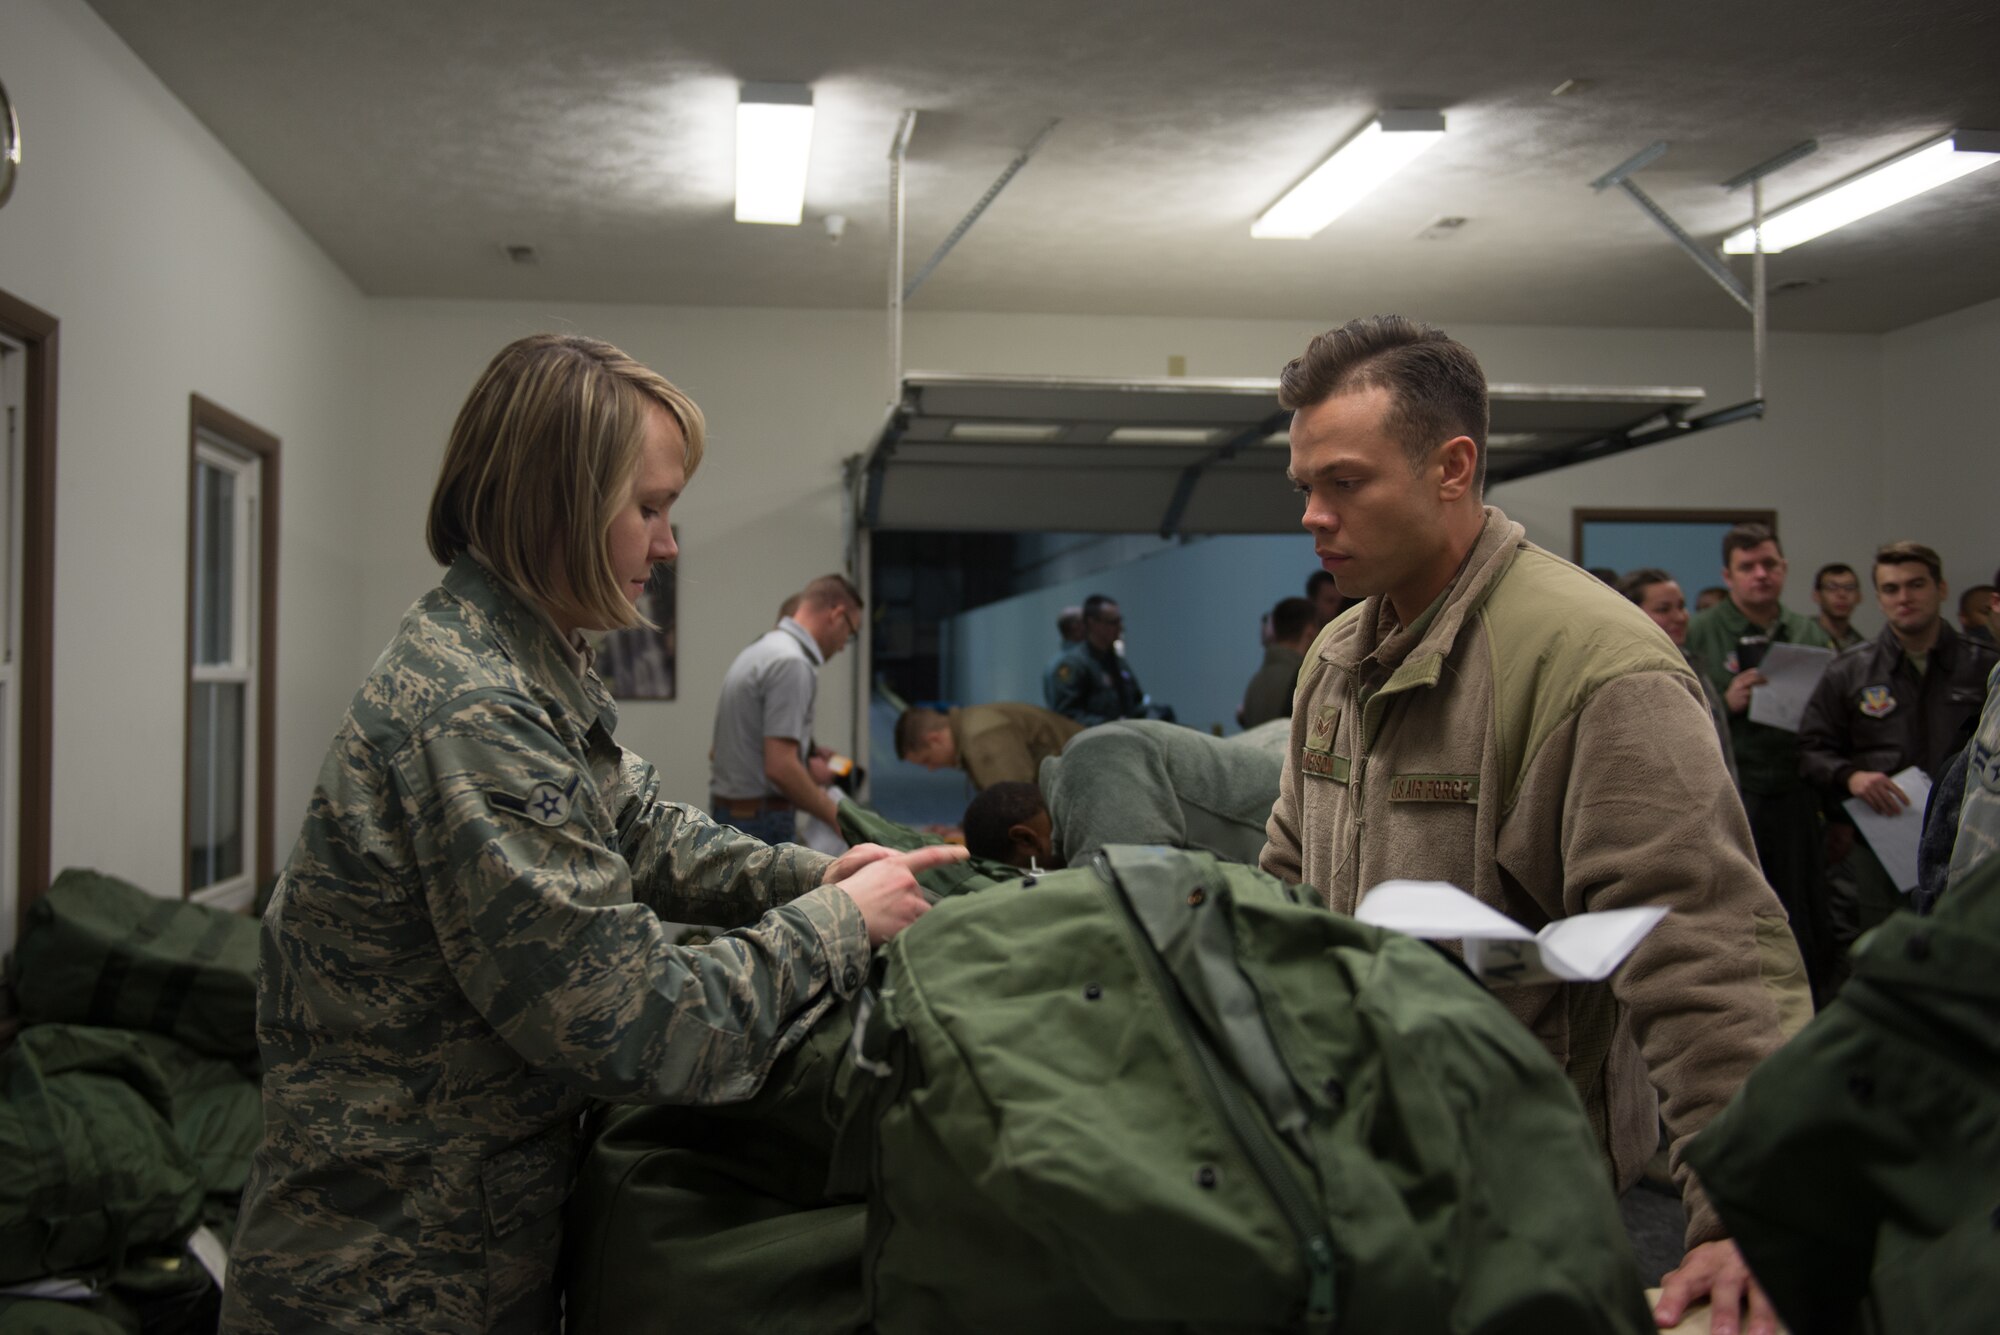 Airman Danuta Lukaszynska, 55th logistics Readiness Squadron, issues mobility bags to members of Team Offutt Jan. 29, 2019, on Offutt Air Force Base, Nebraska. The base participated in Phase I of Operational Readiness Exercise Winter Havoc. (U.S. Air Force photo by Tech. Sgt. Rachelle Blake)